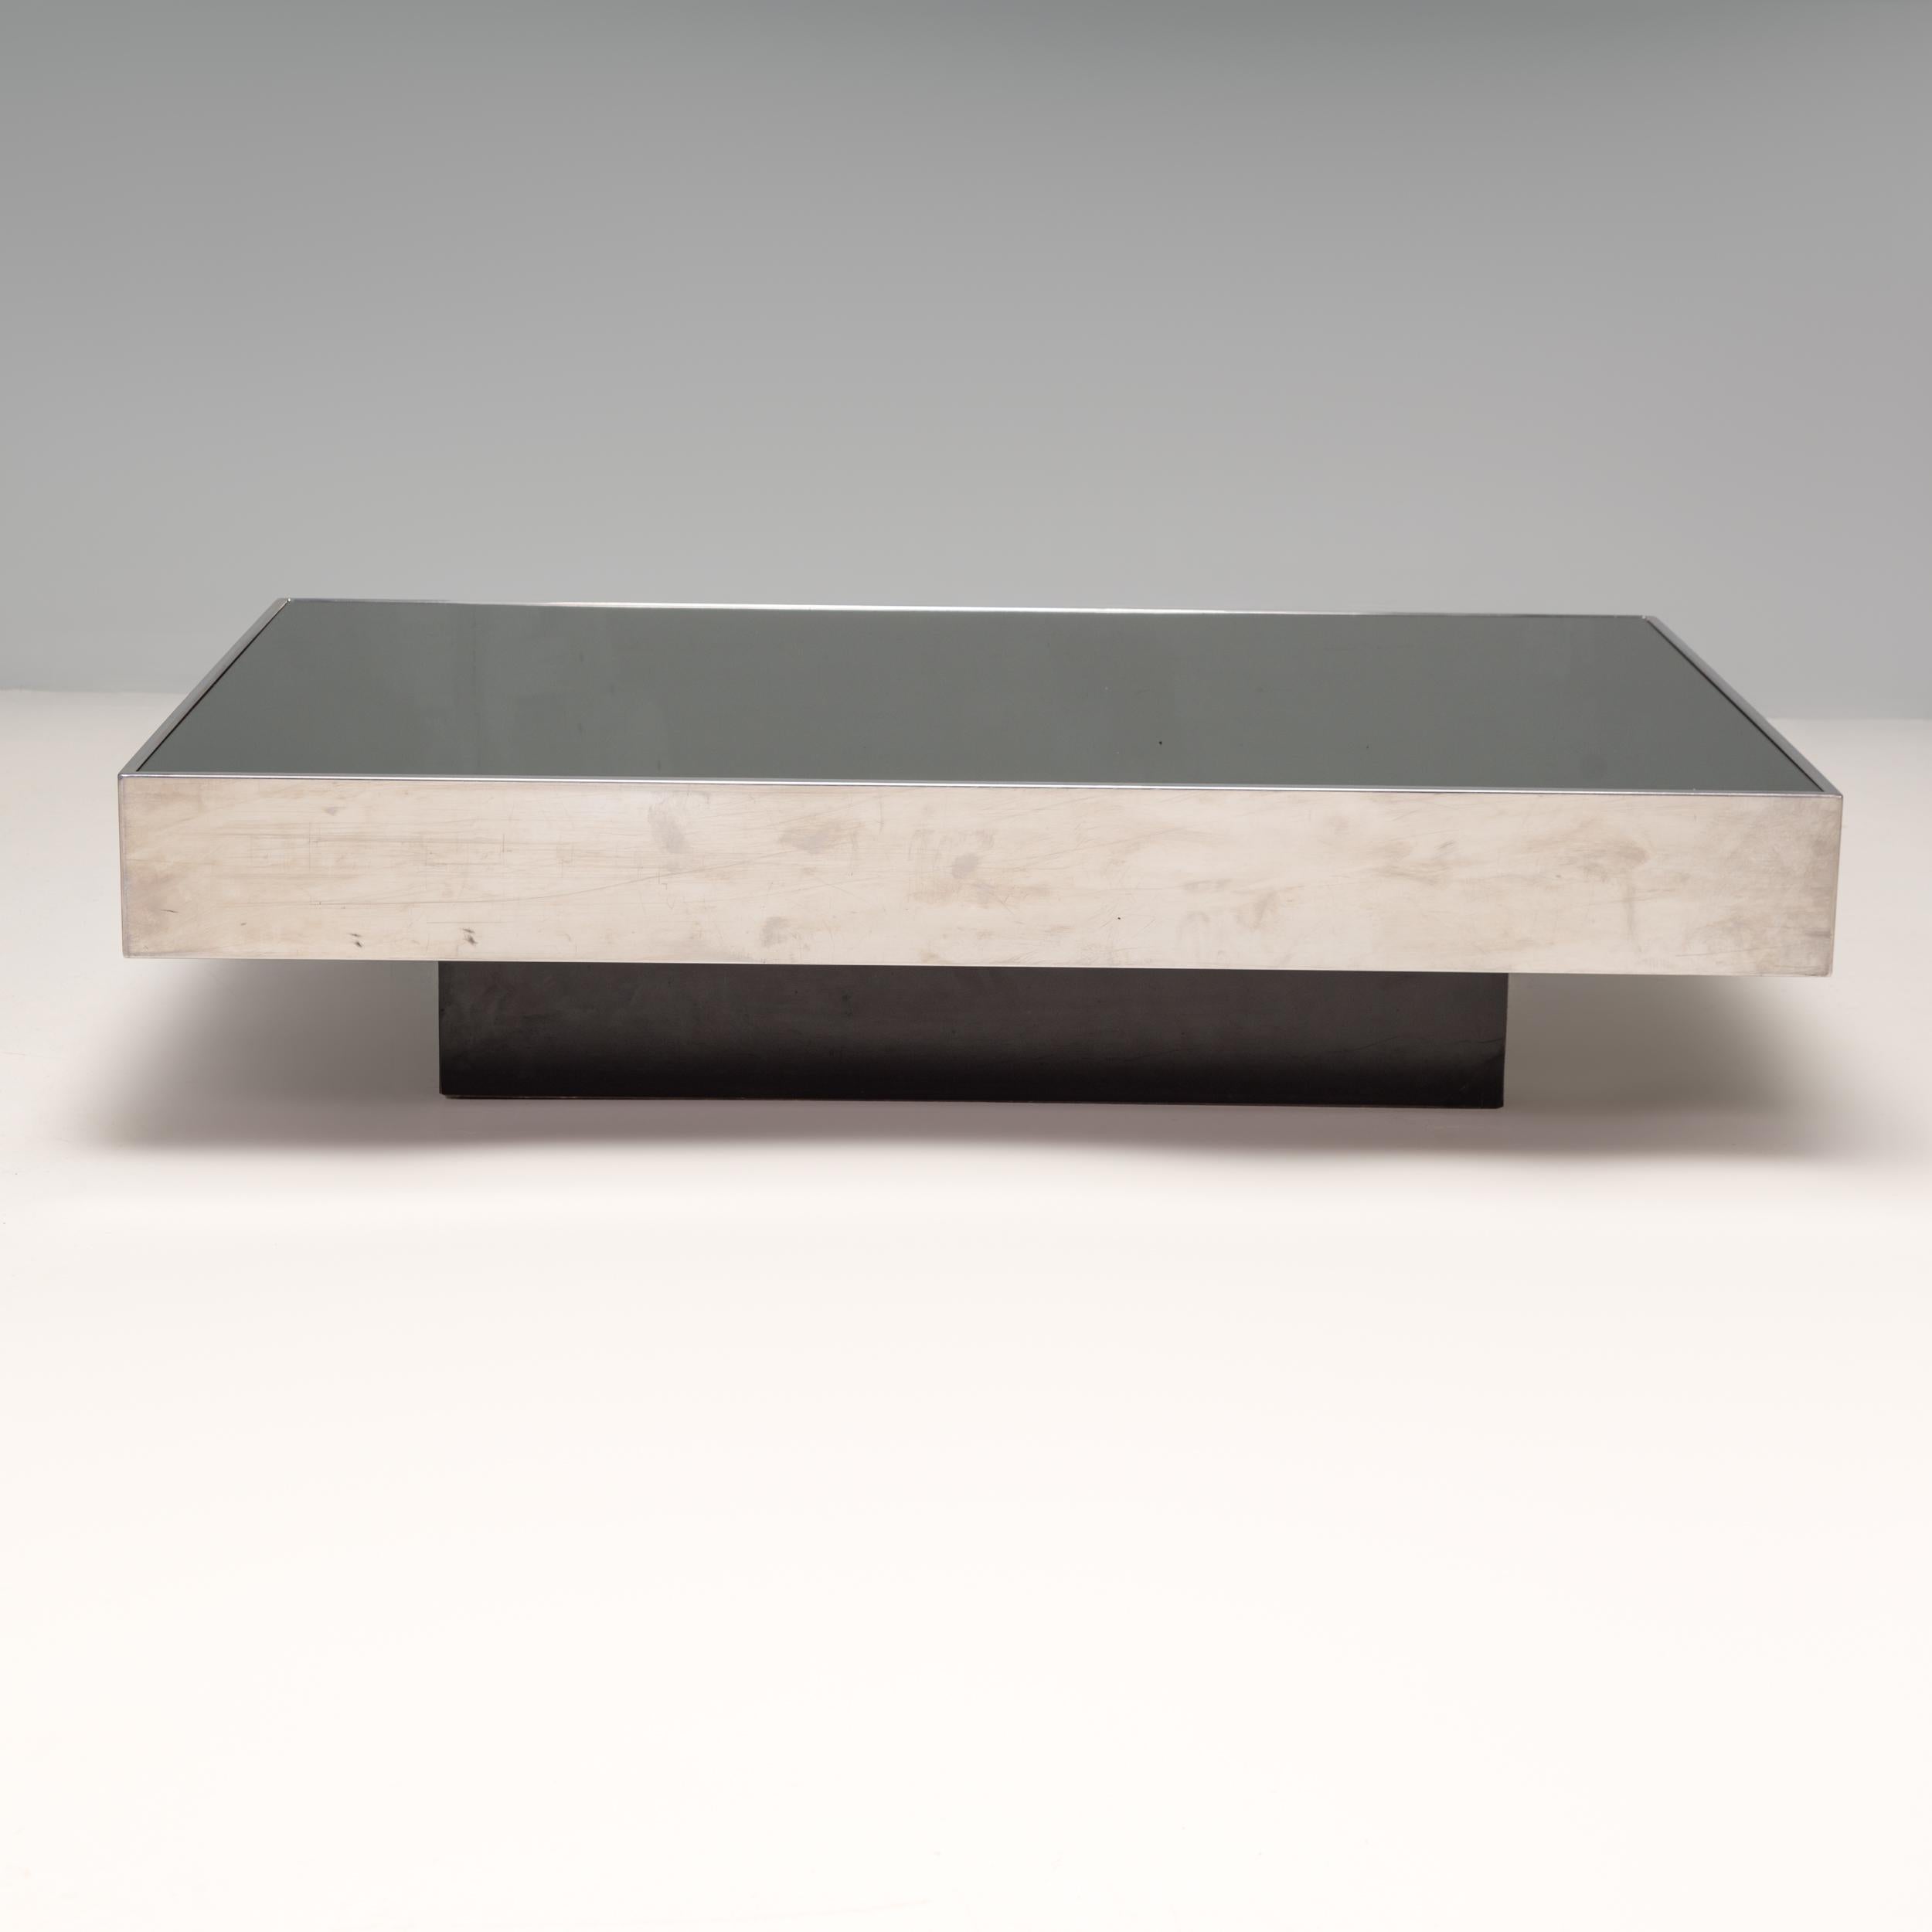 Designed by Willy Rizzo and manufactured by Cidue, this coffee table is a fantastic example of 1970s Italian design.

Rizzo was a photographer who designed furniture for his own home and friends before starting to have his designs manufactured for